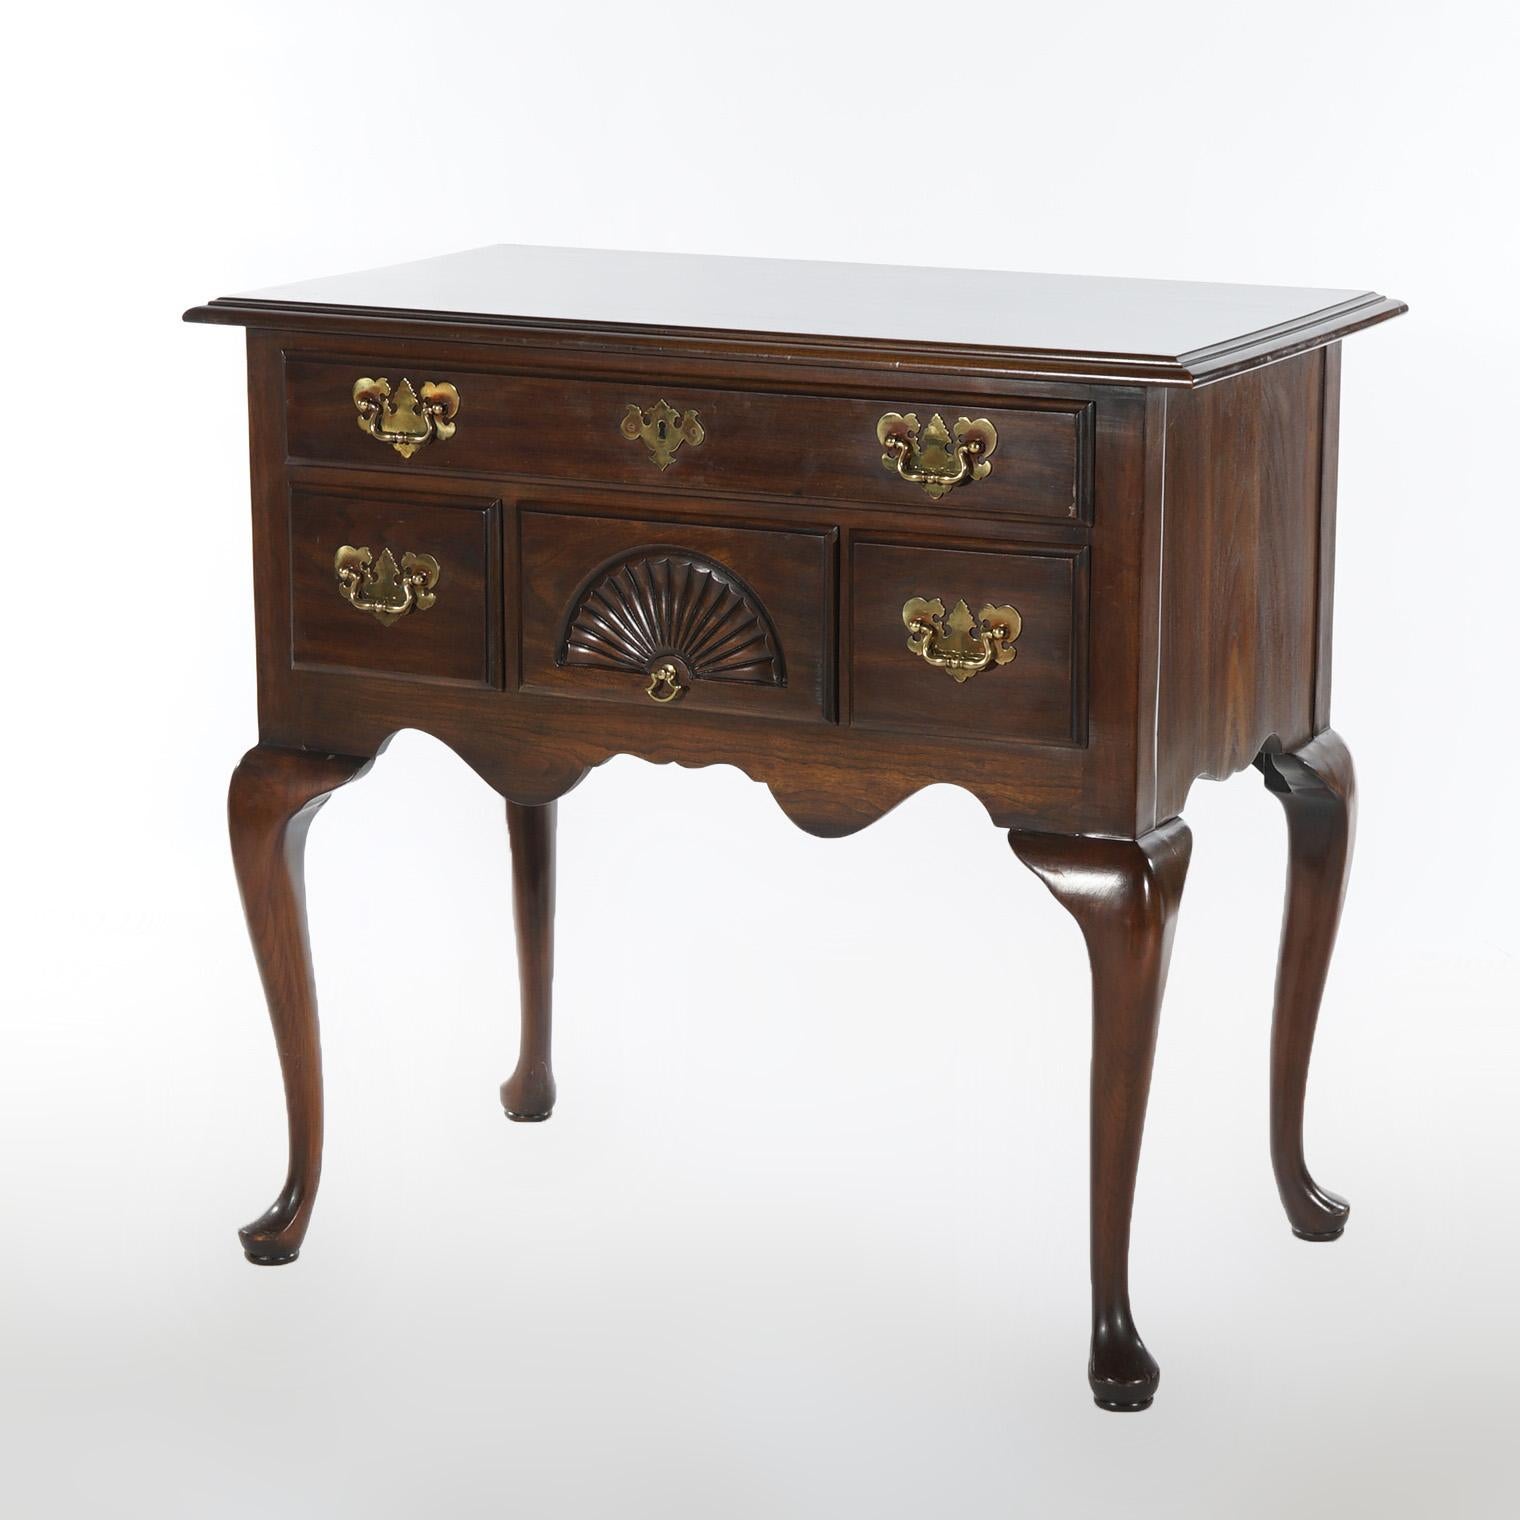 A Queen Anne style lowboy by Harden offers cherry construction with case having single long drawer over three smaller drawers (the center with a carved stylized fan), and shaped apron; raised on cabriole legs terminating in pad feet; cast brass